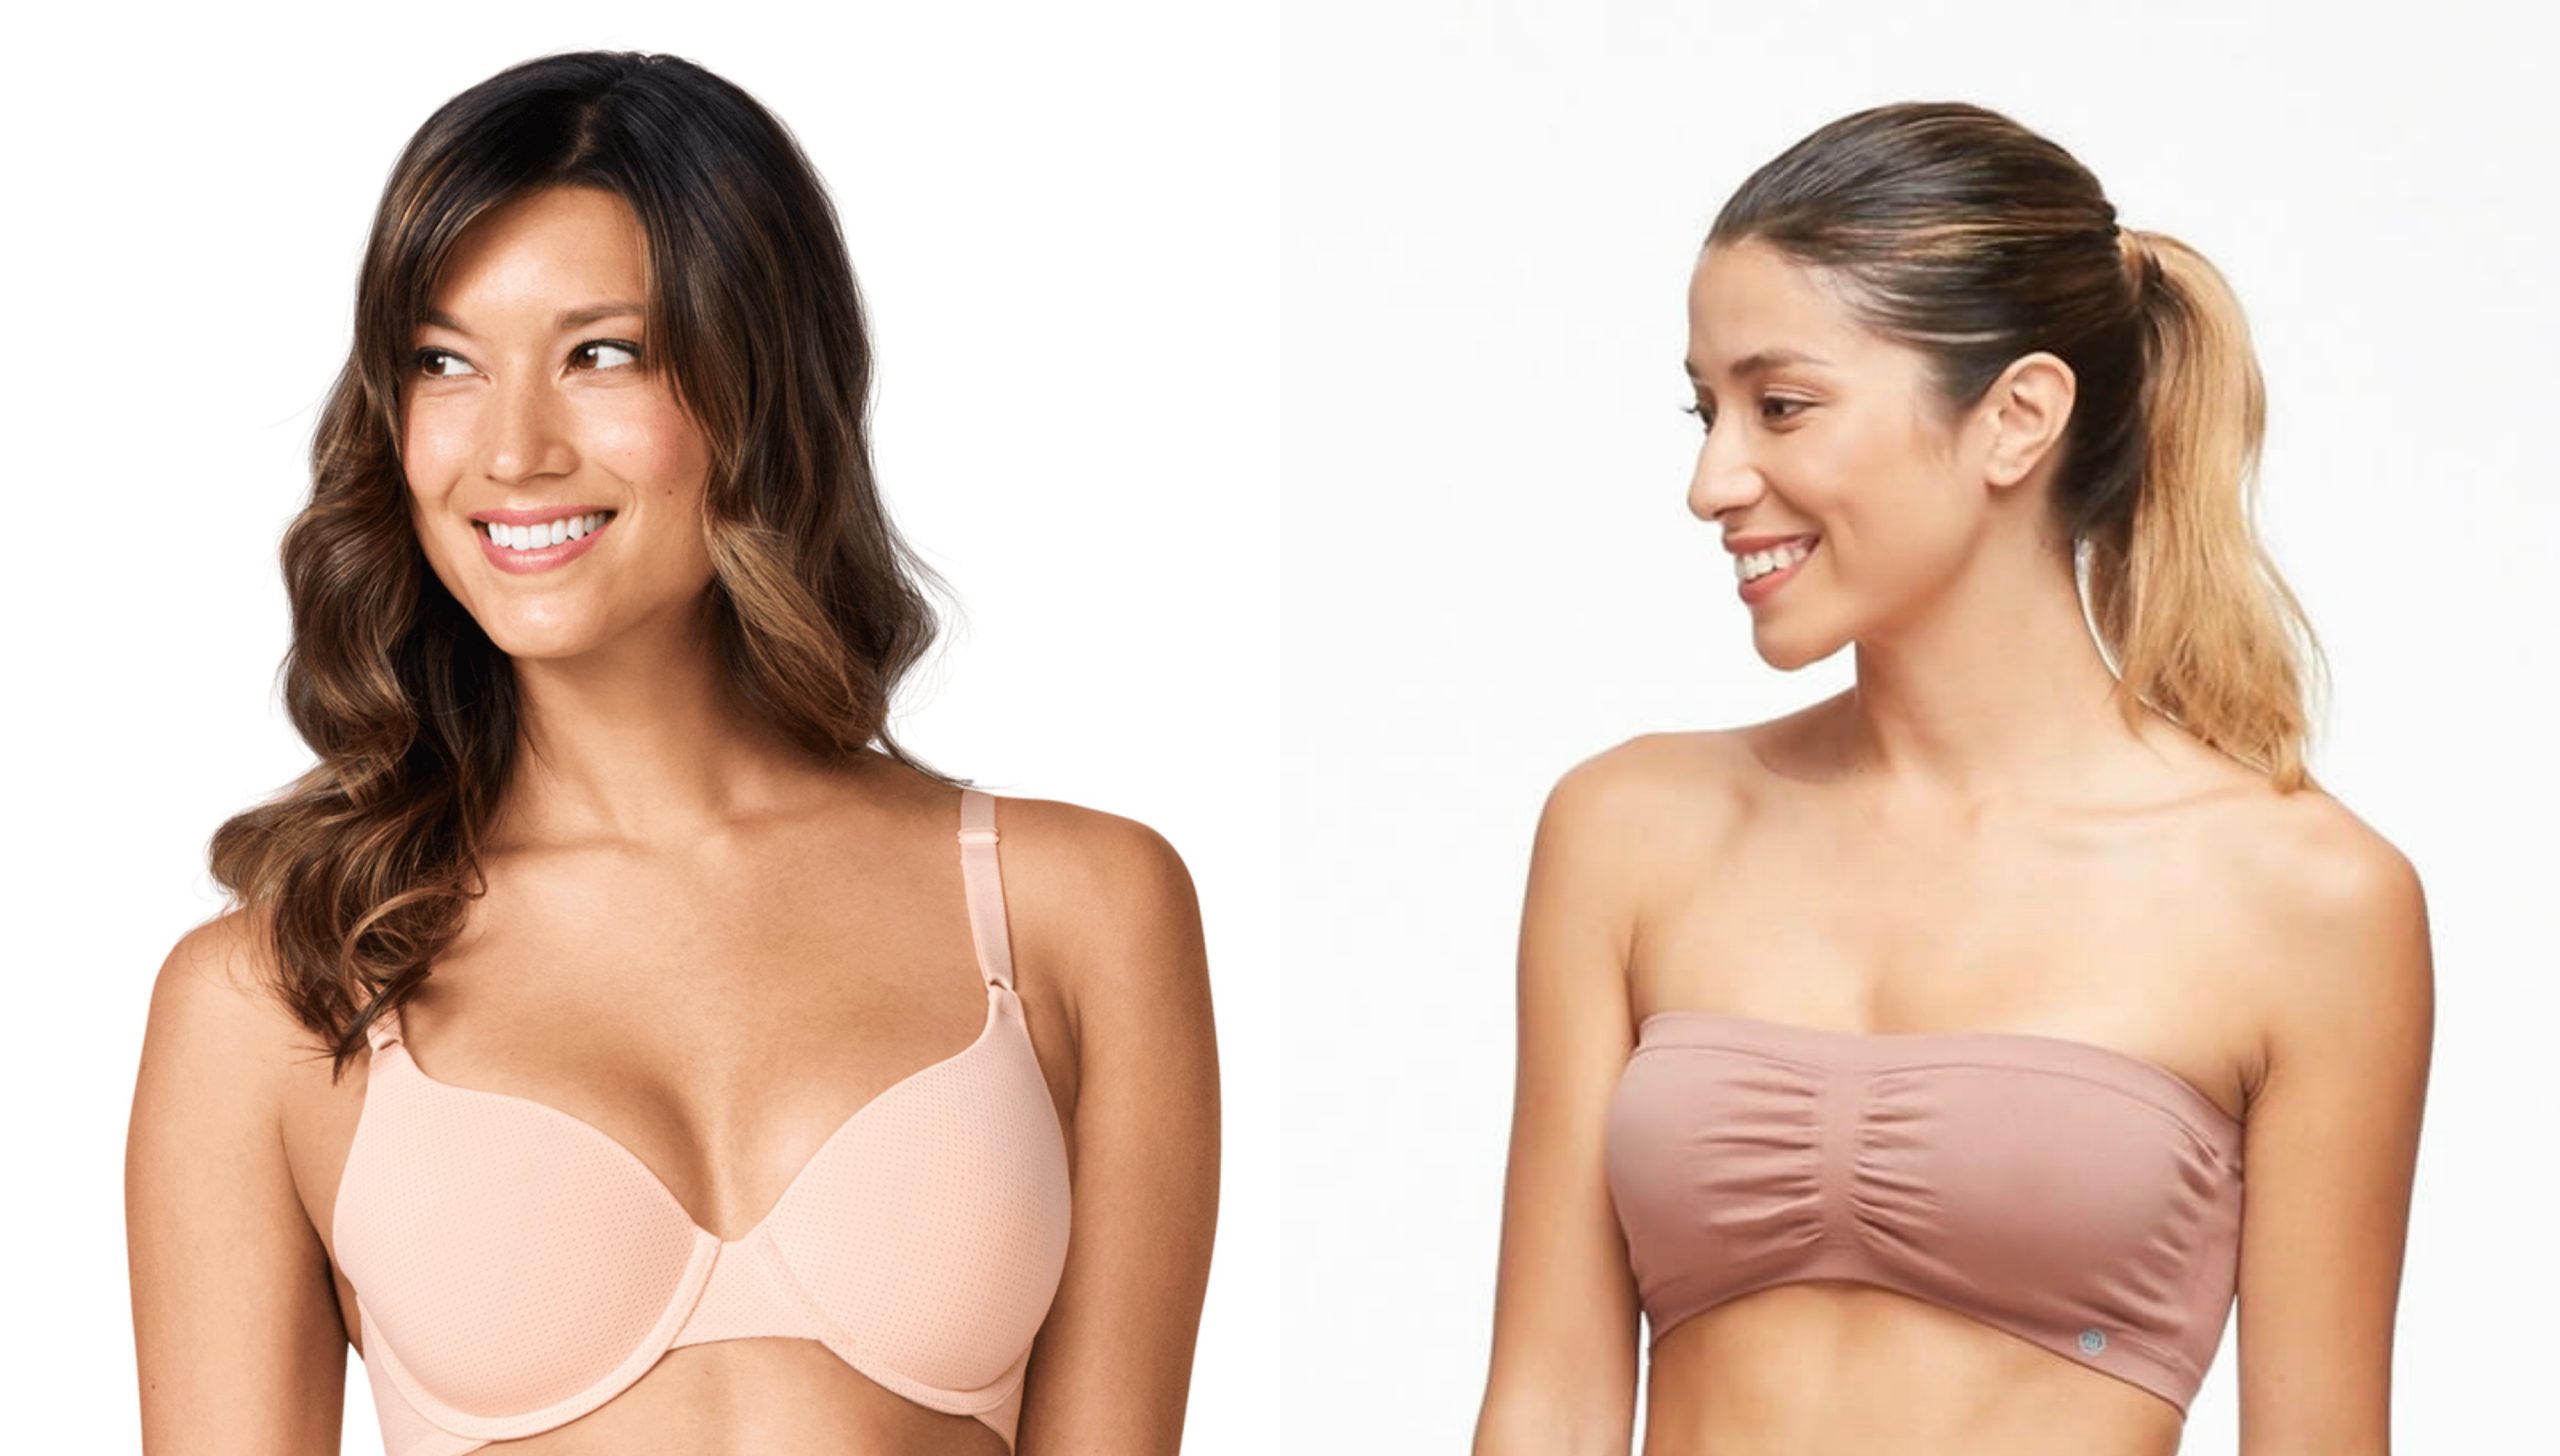 Lingerie Shopping Guide: How To Buy A Friend A Bra Or Other Lingerie Gift -  ParfaitLingerie.com - Blog